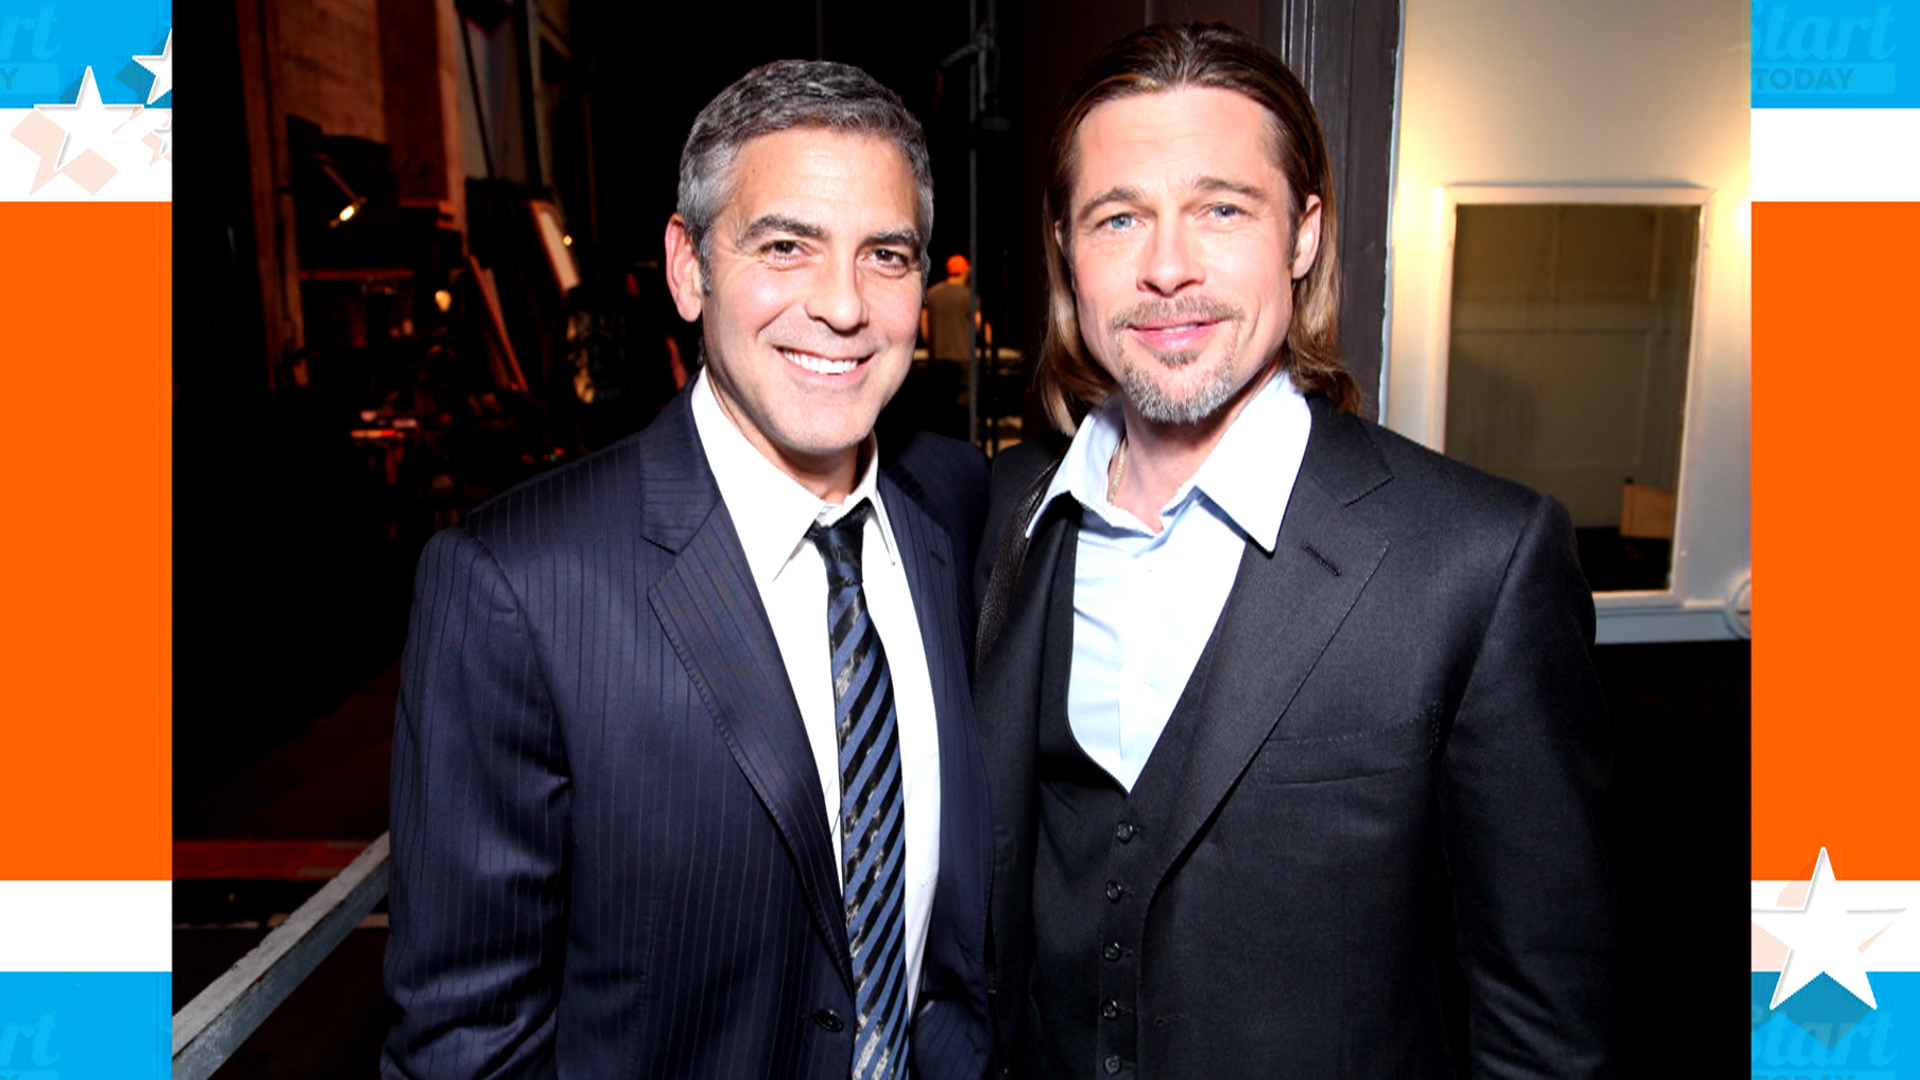 George Clooney: Latest prank on Brad Pitt will get me arrested - TODAY.com